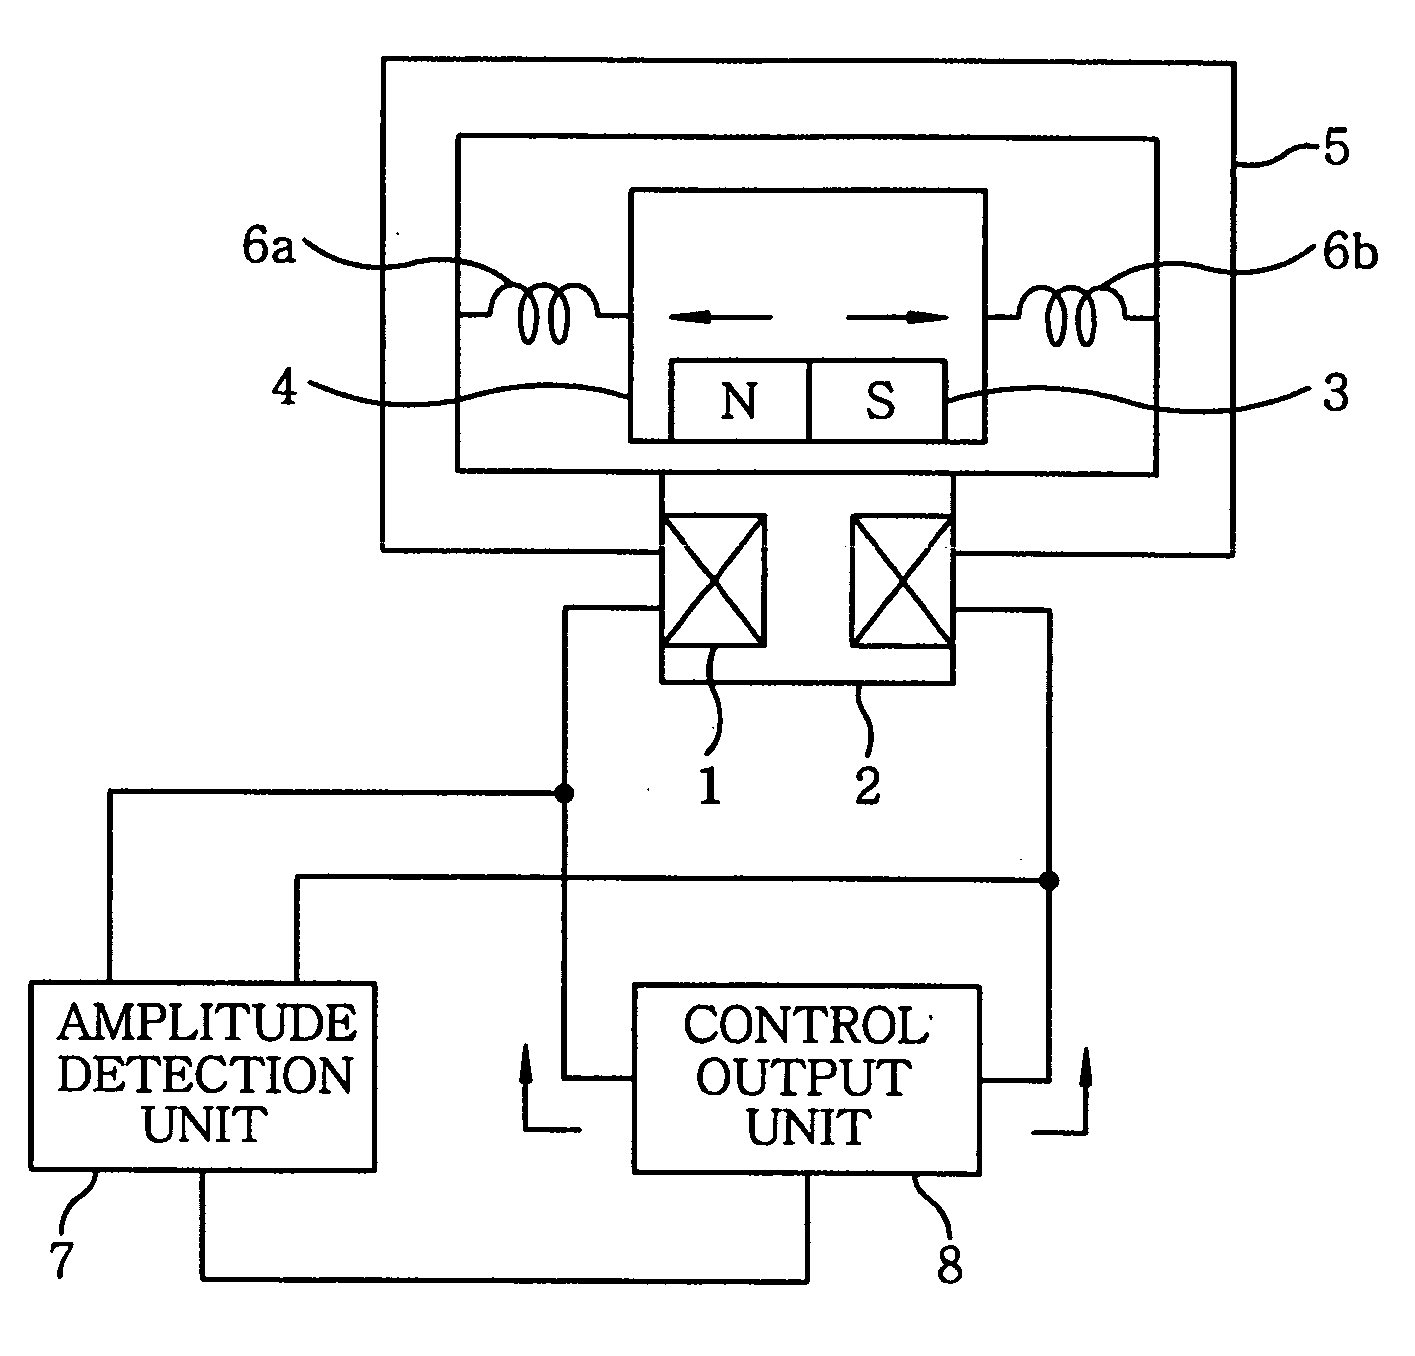 Method for controlling operation of a linear vibration motor